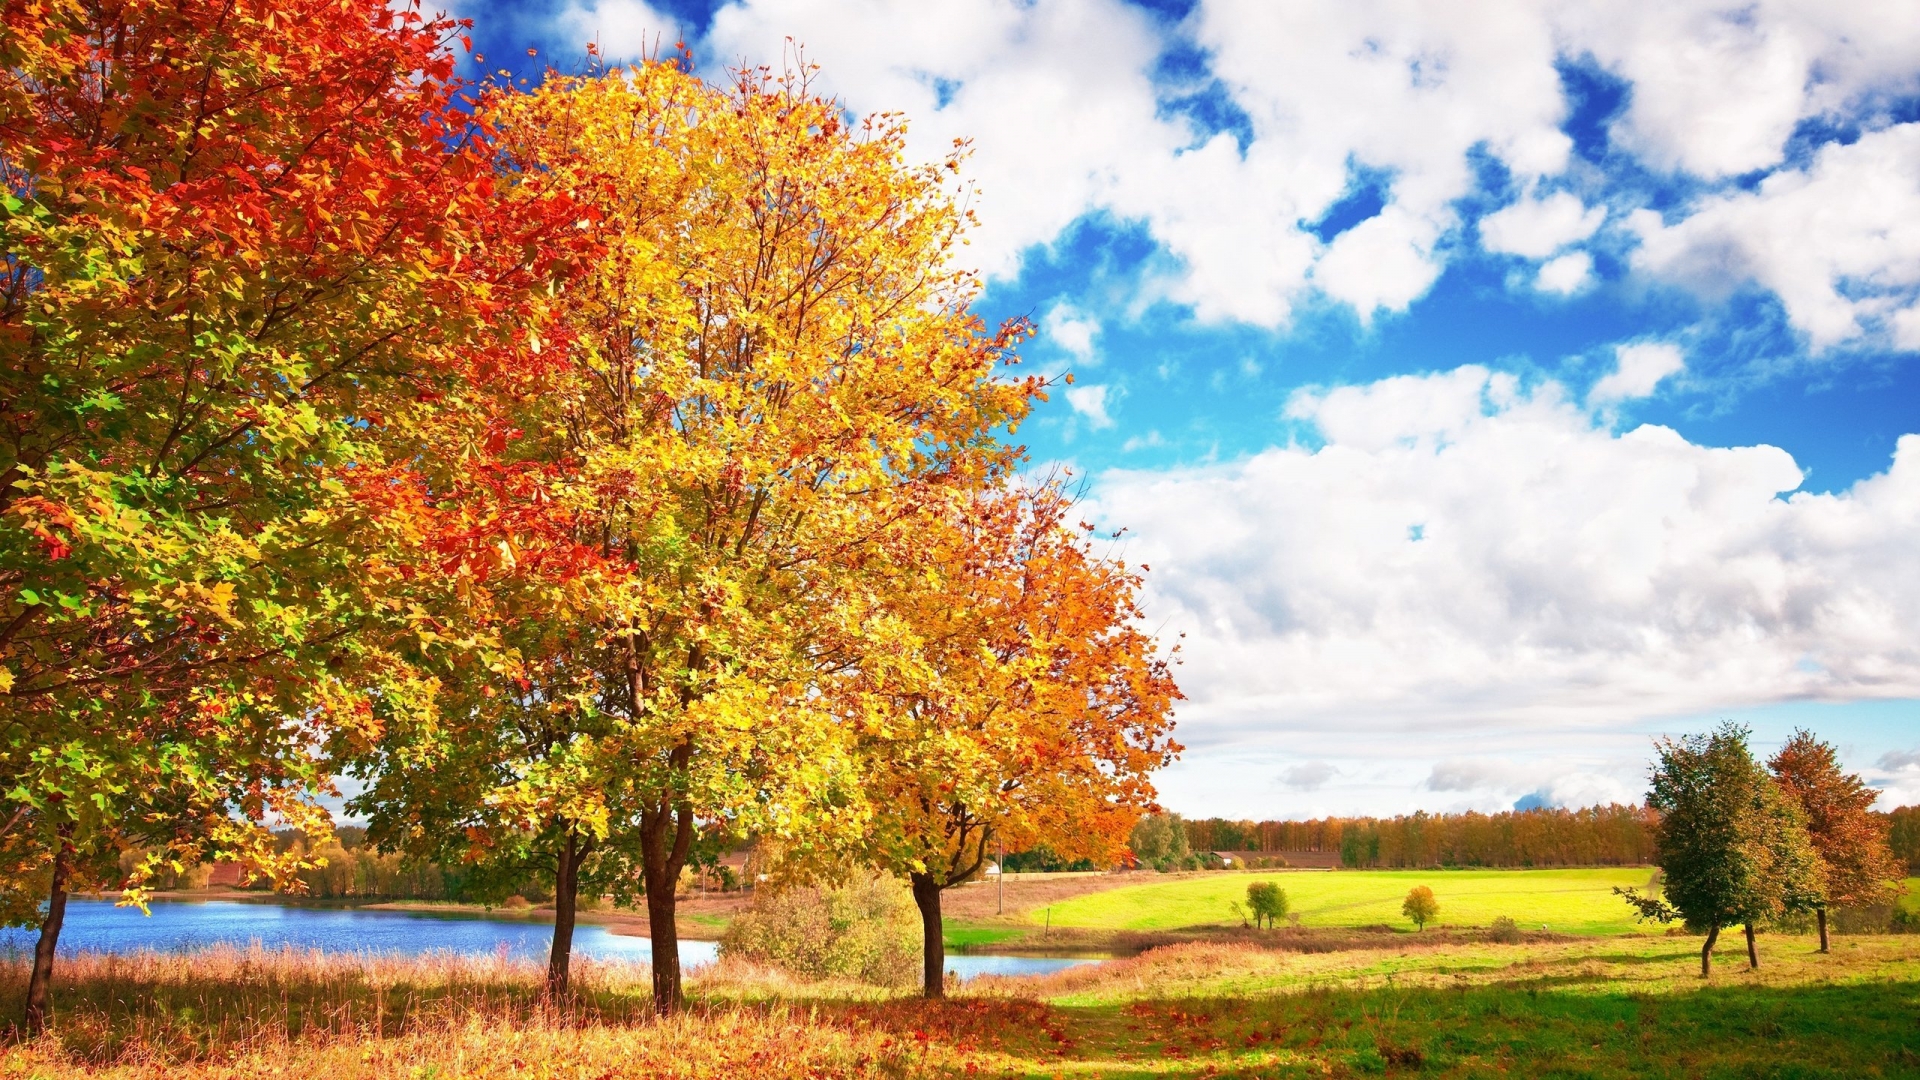 Sunny Autumn Day for 1920 x 1080 HDTV 1080p resolution